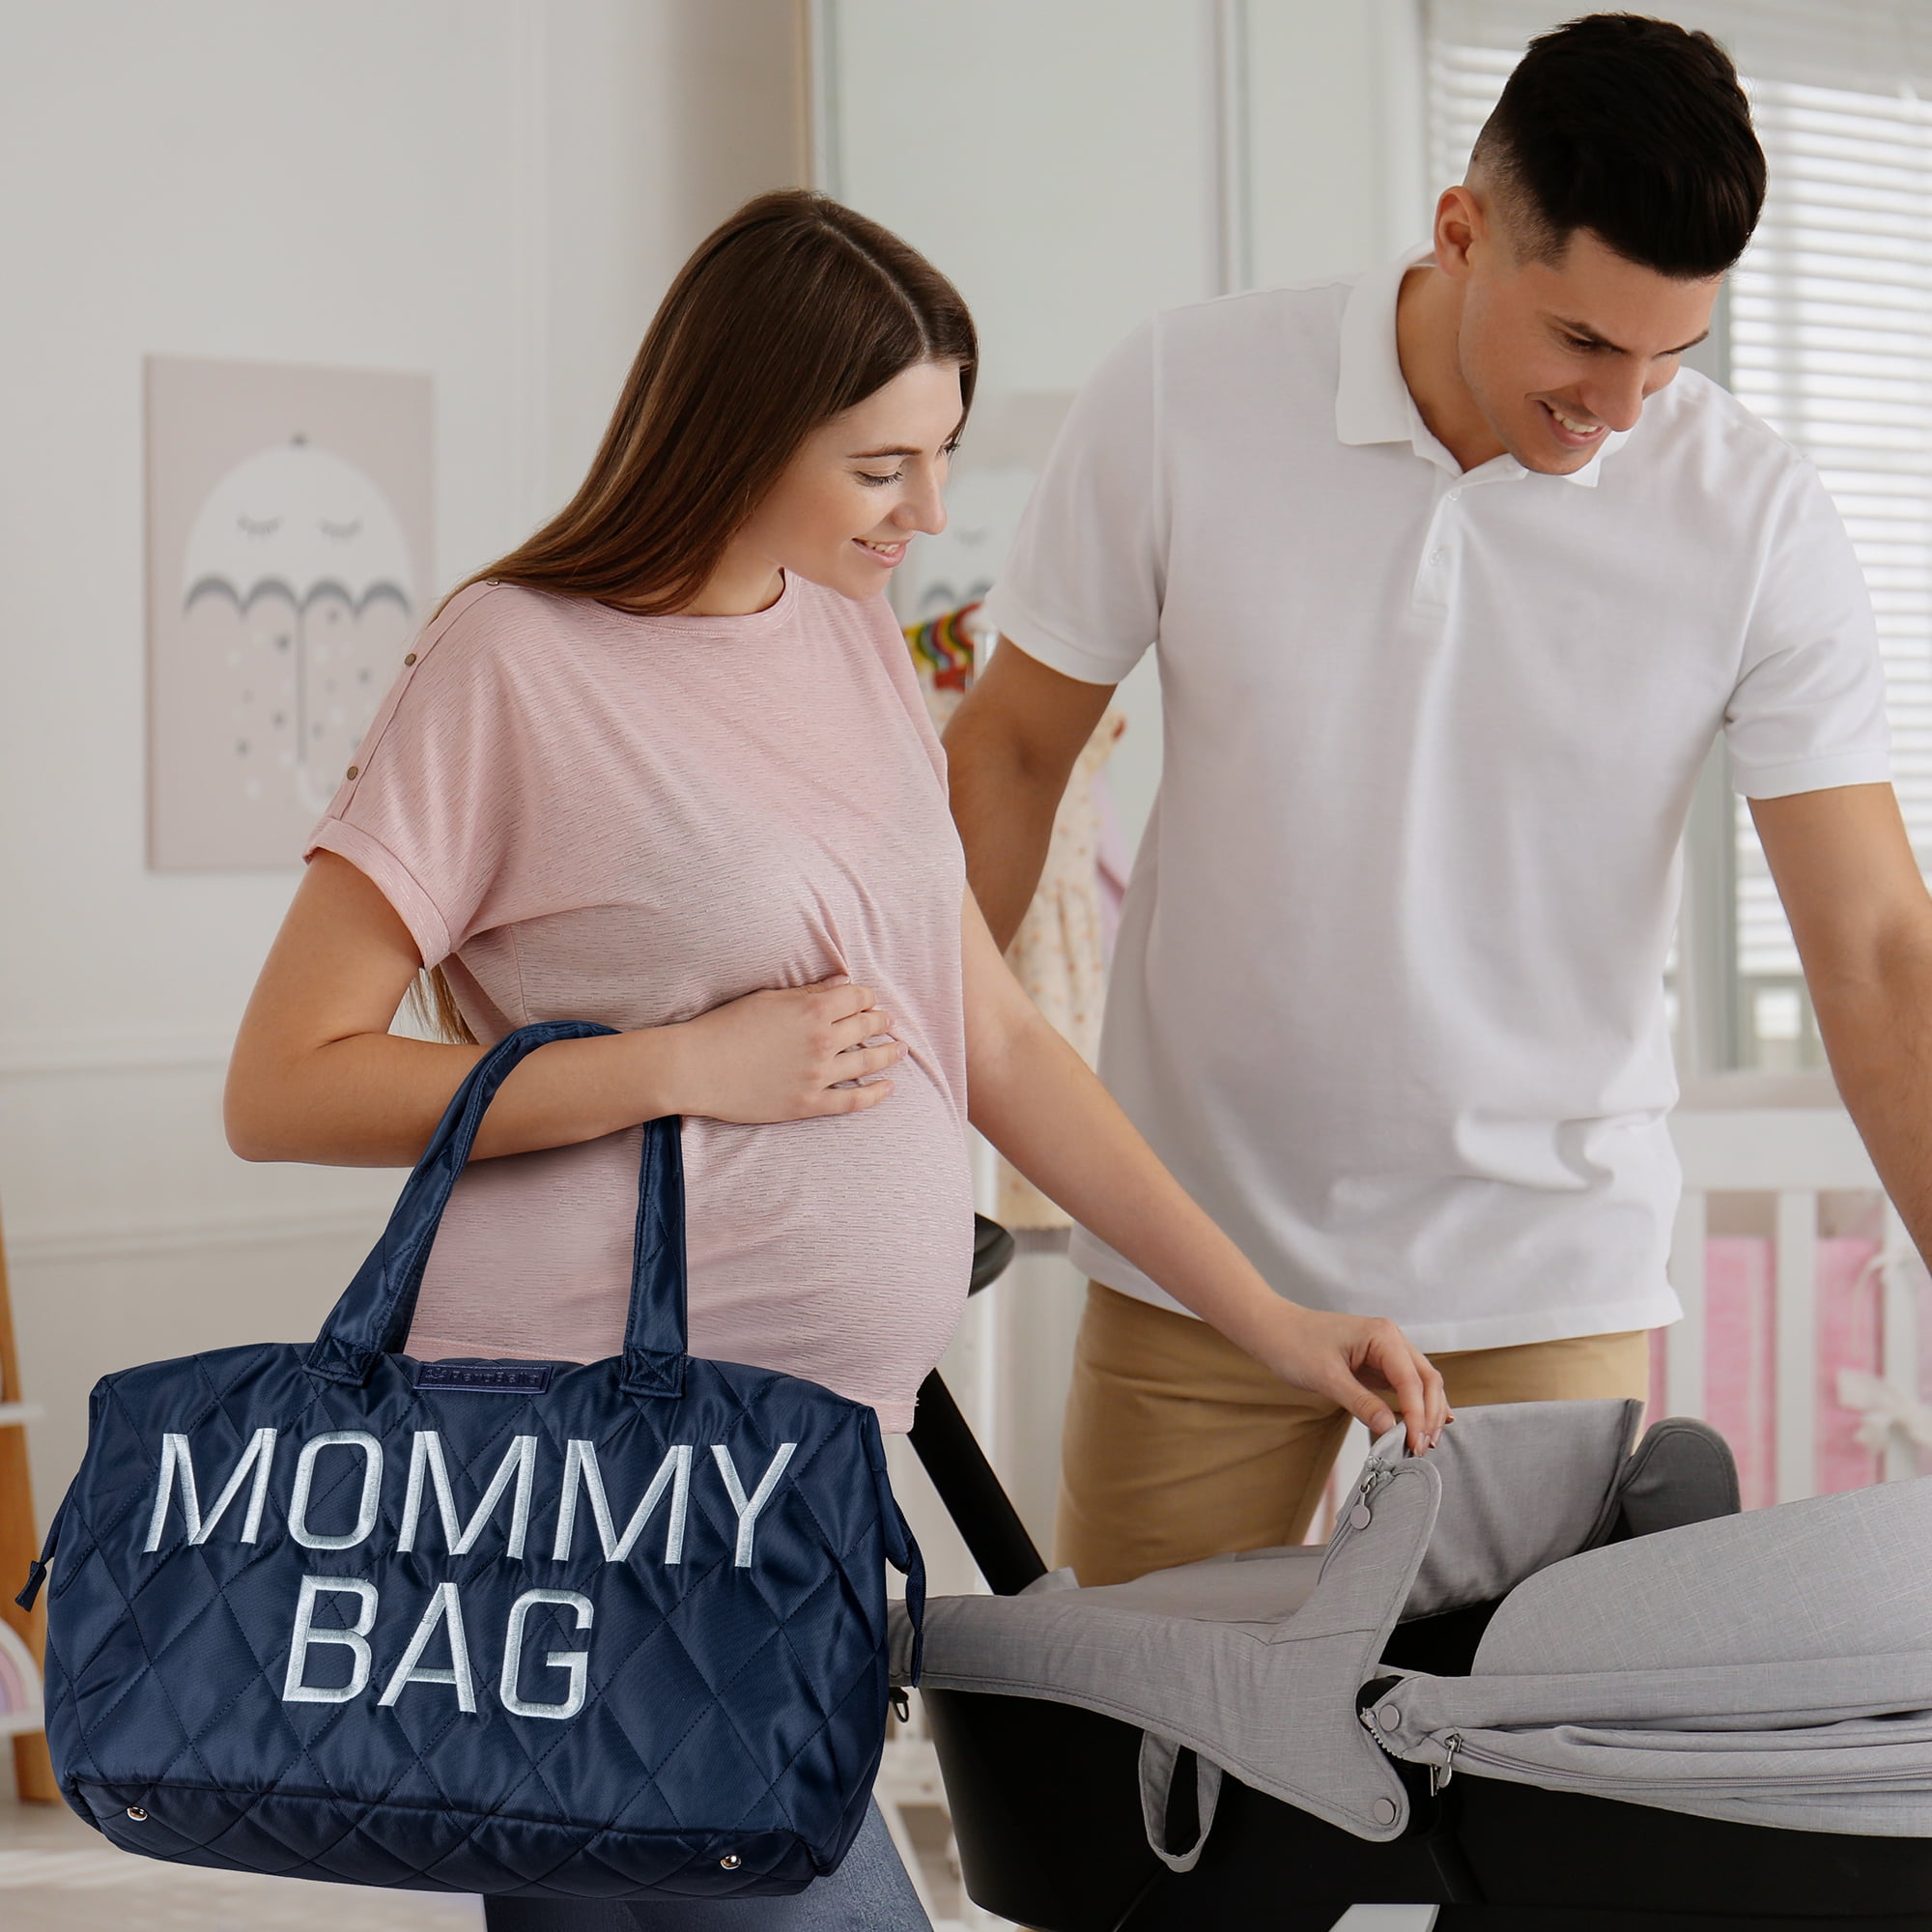 Perabella Mommy Bag for Hospital, Mom Bag Diaper Bag Tote, Mommy Hospital Bag, Mom Hospital Bags for Labor and Delivery Essentials, Maternity Bag for